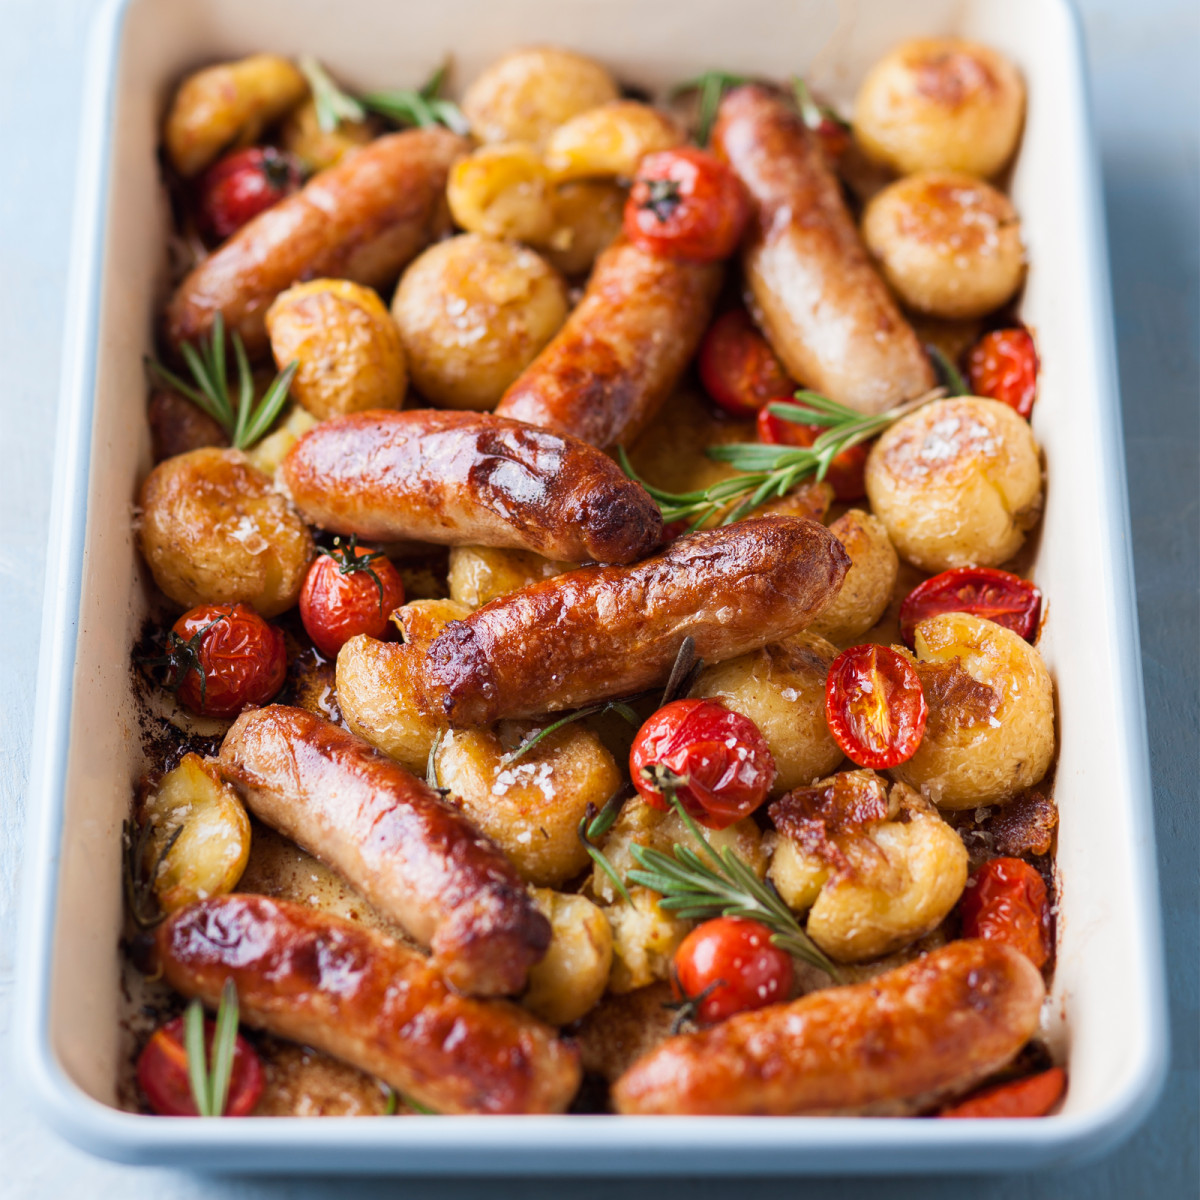 Recipes With Breakfast Sausage
 Recipe Easy pork sausages and potato bake